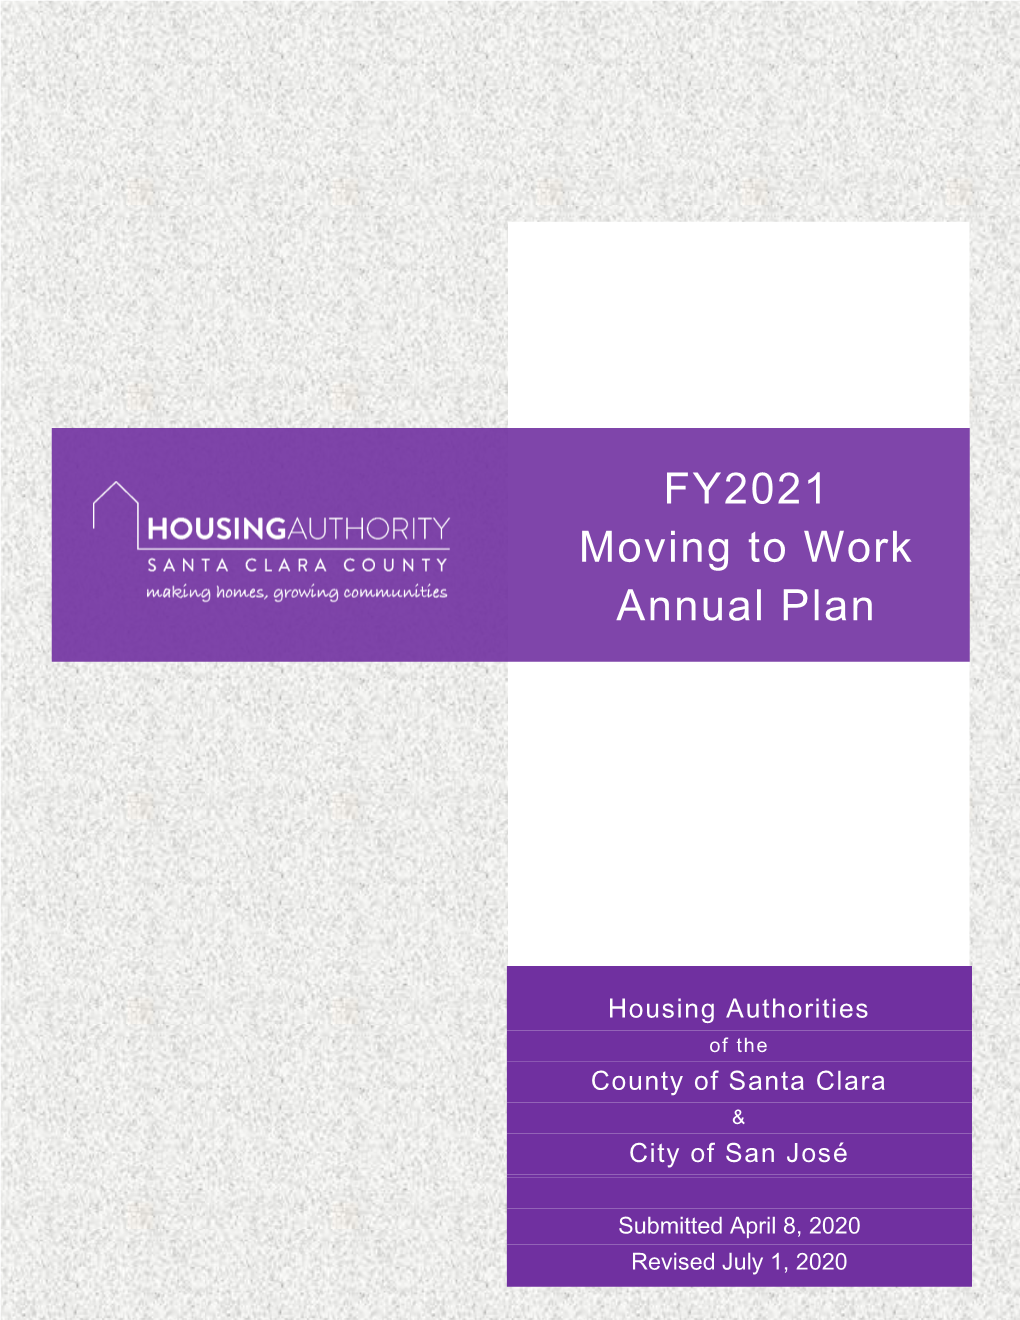 FY2021 Moving to Work Annual Plan